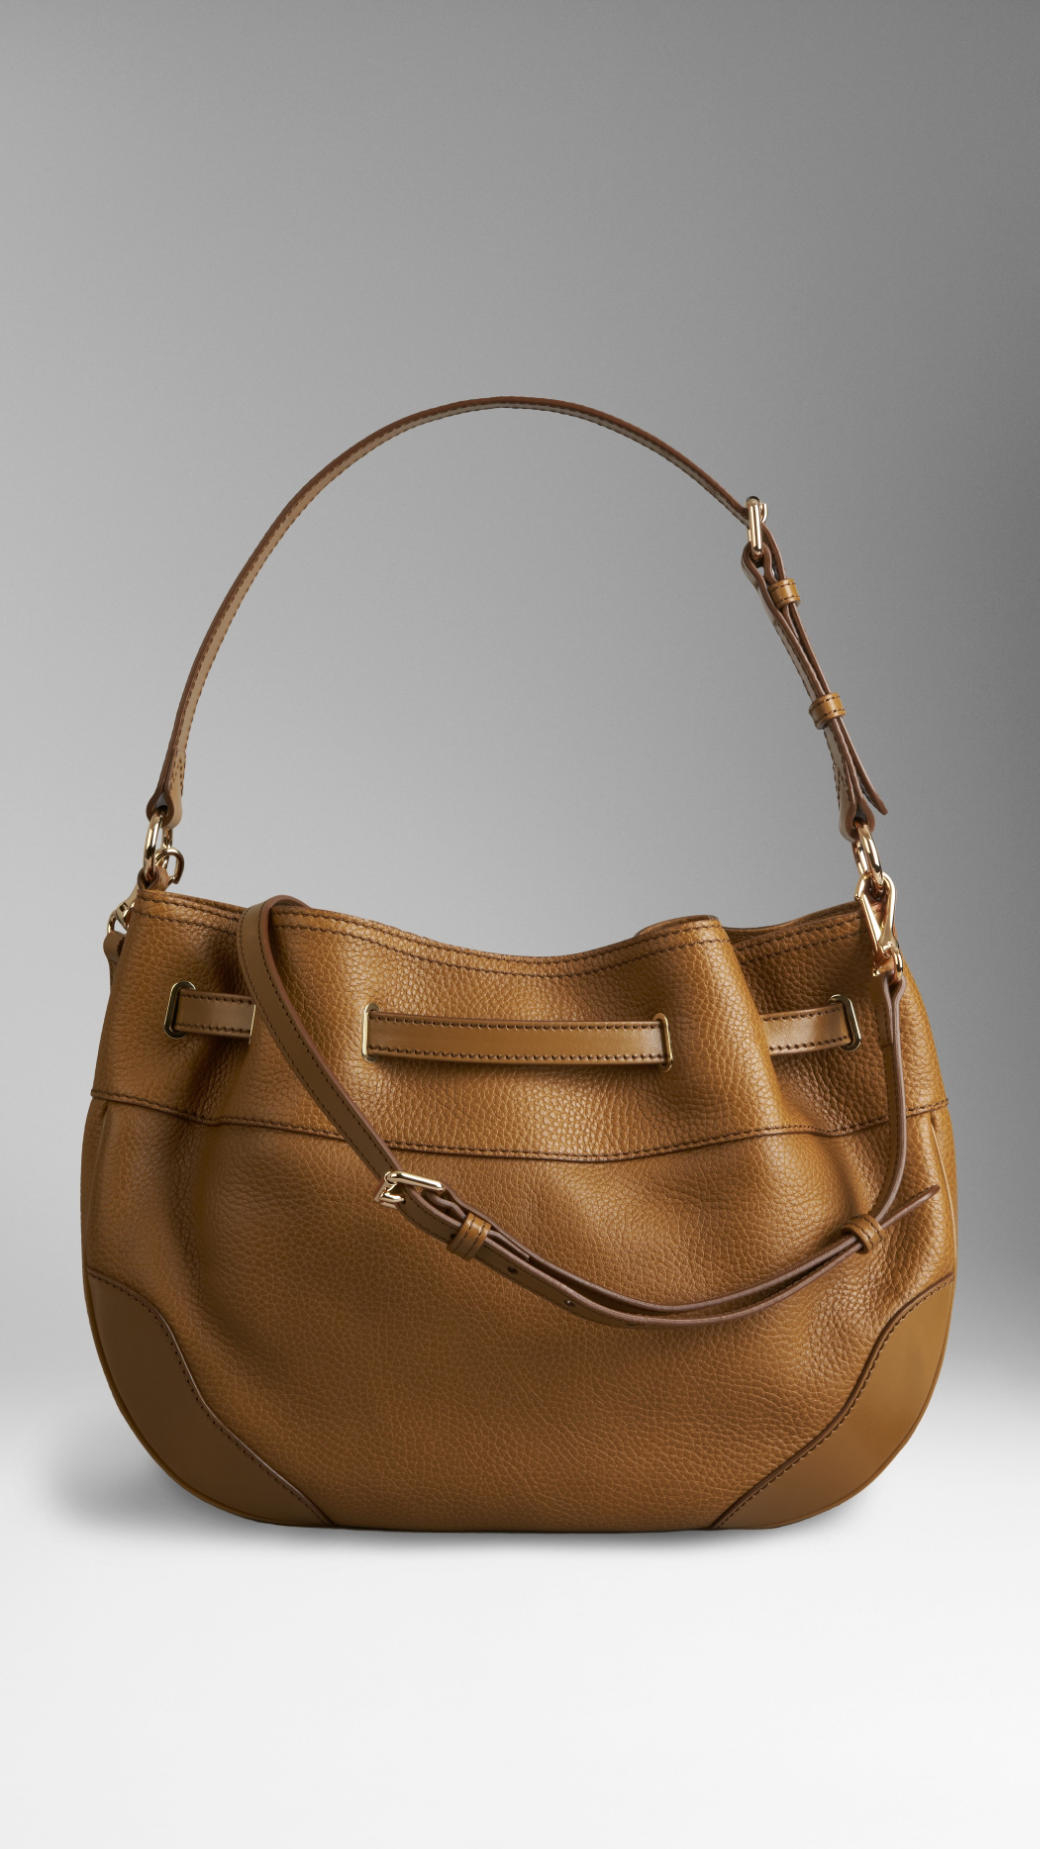 Burberry Heritage Grain Leather Hobo Bag in Brown (MID CAMEL) | Lyst